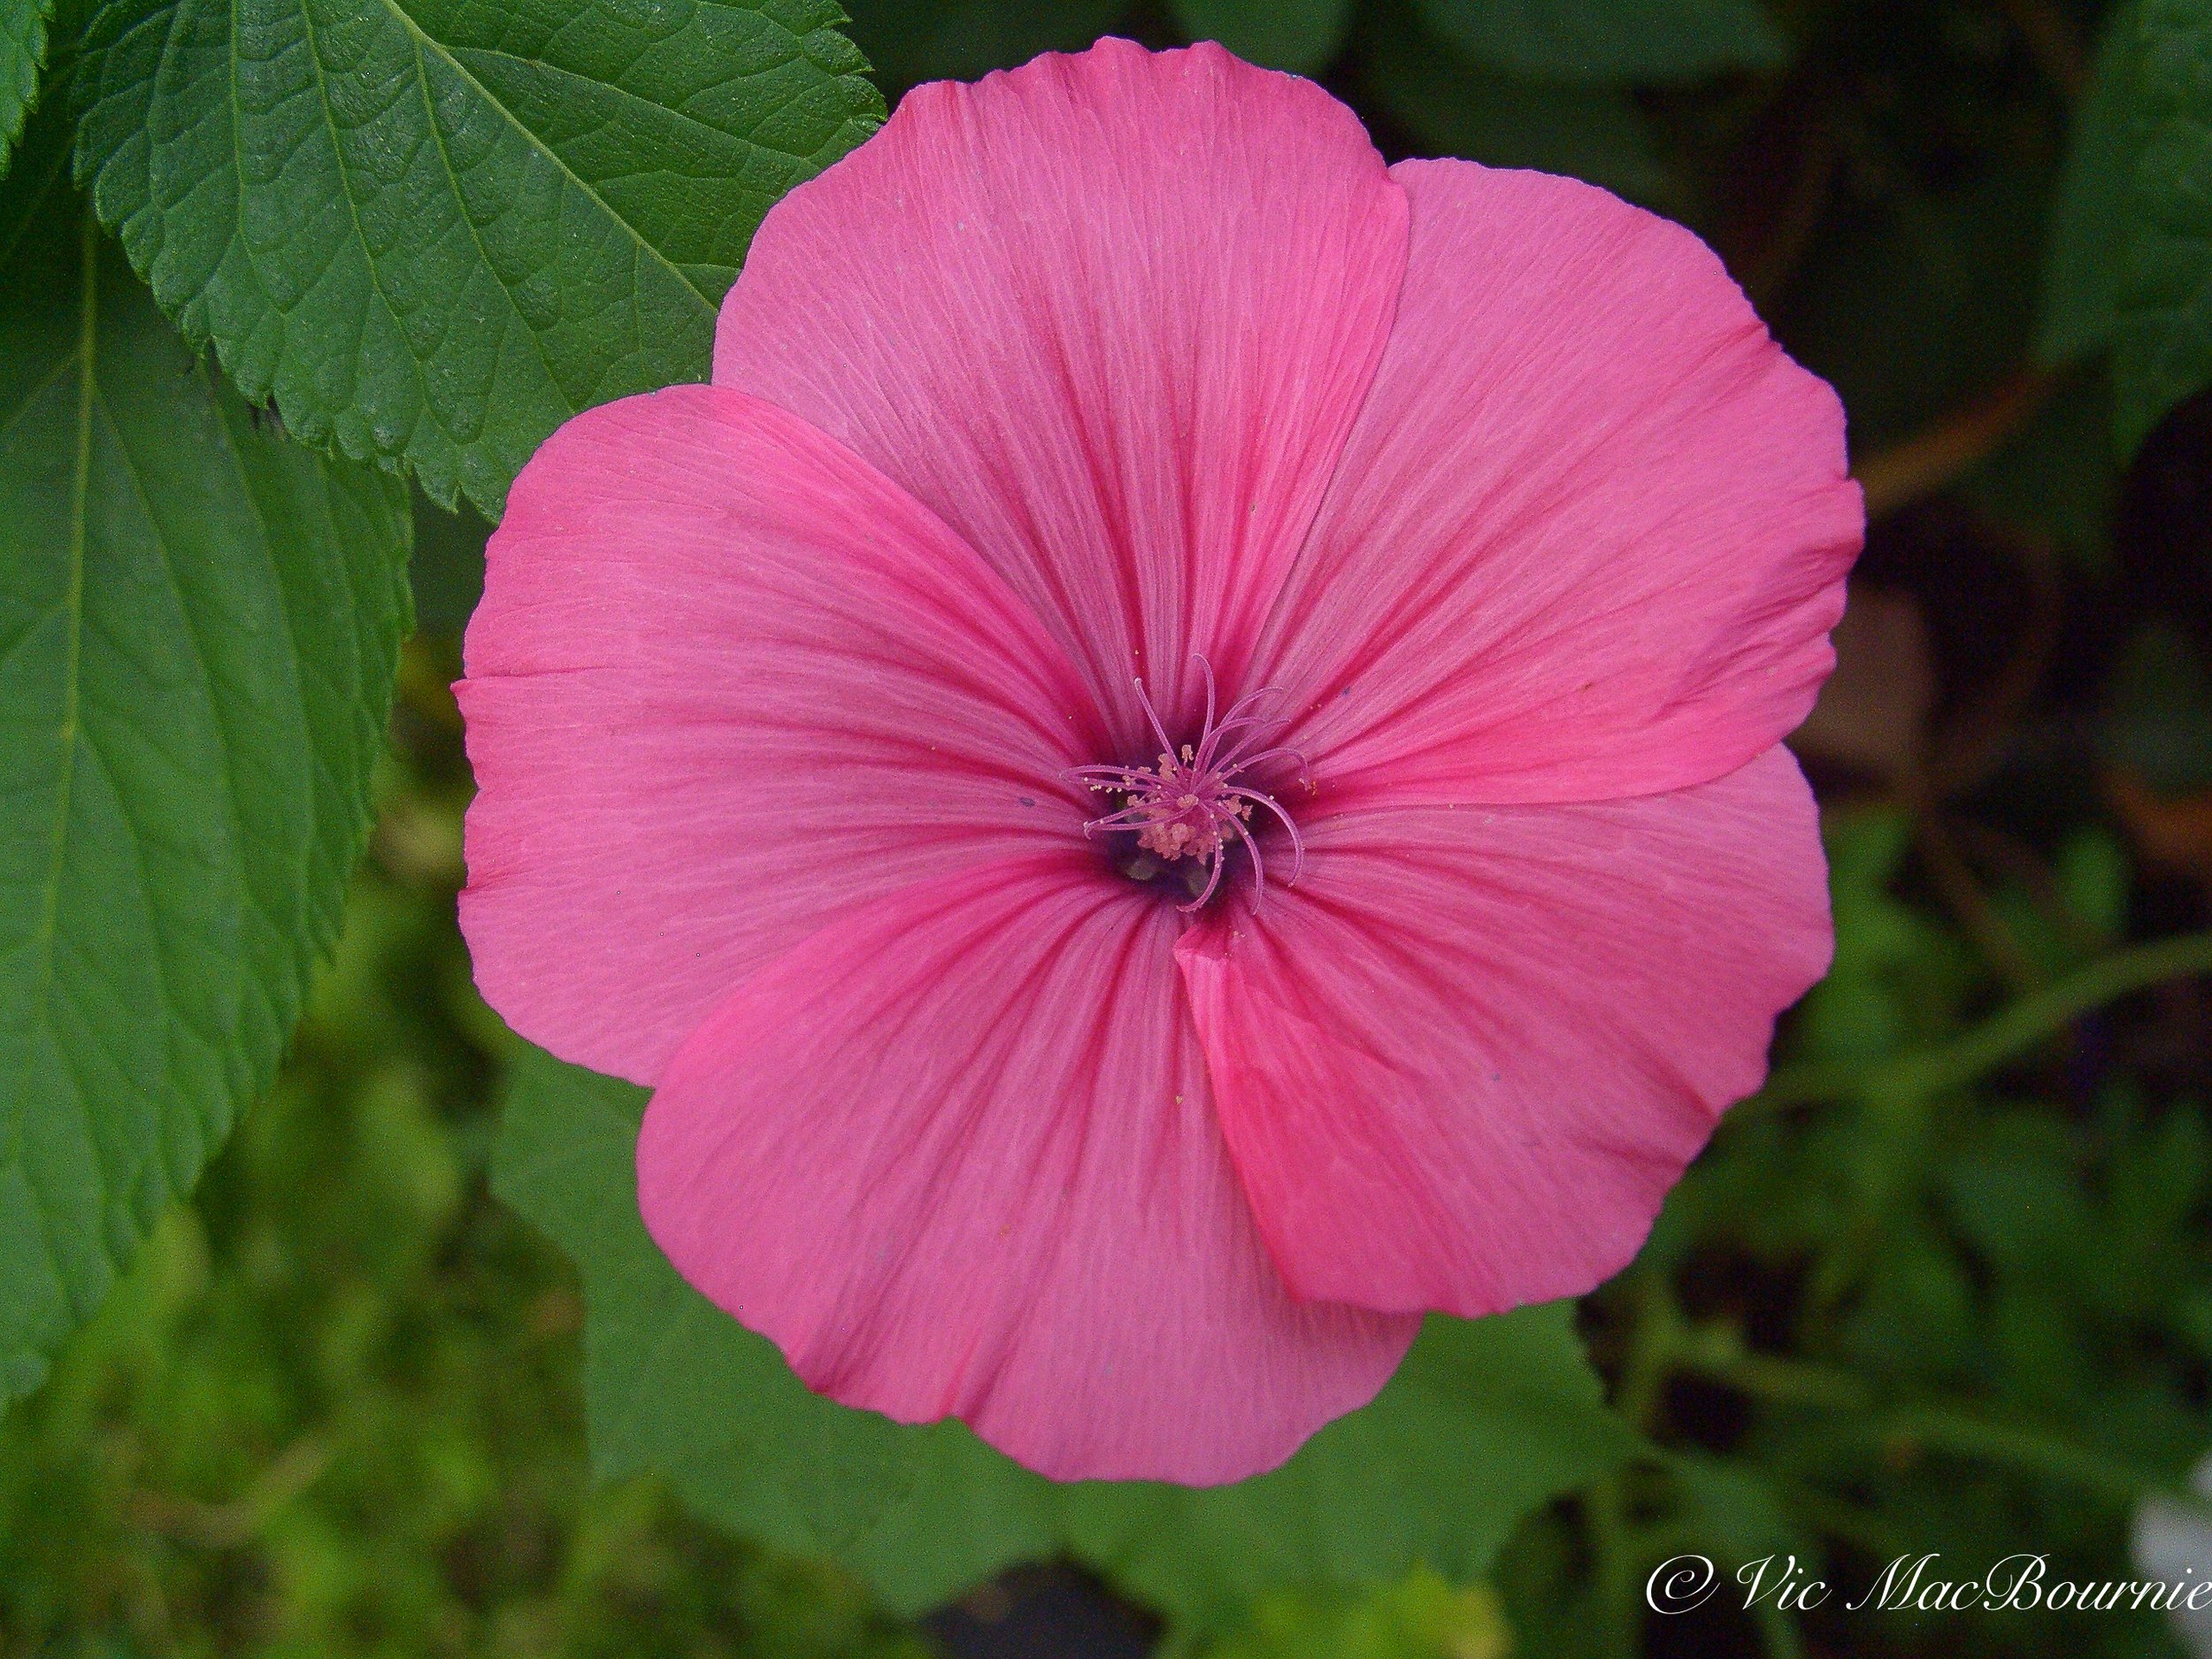 A beautiful Lavatera flower grown from seed and used in one of our planters.